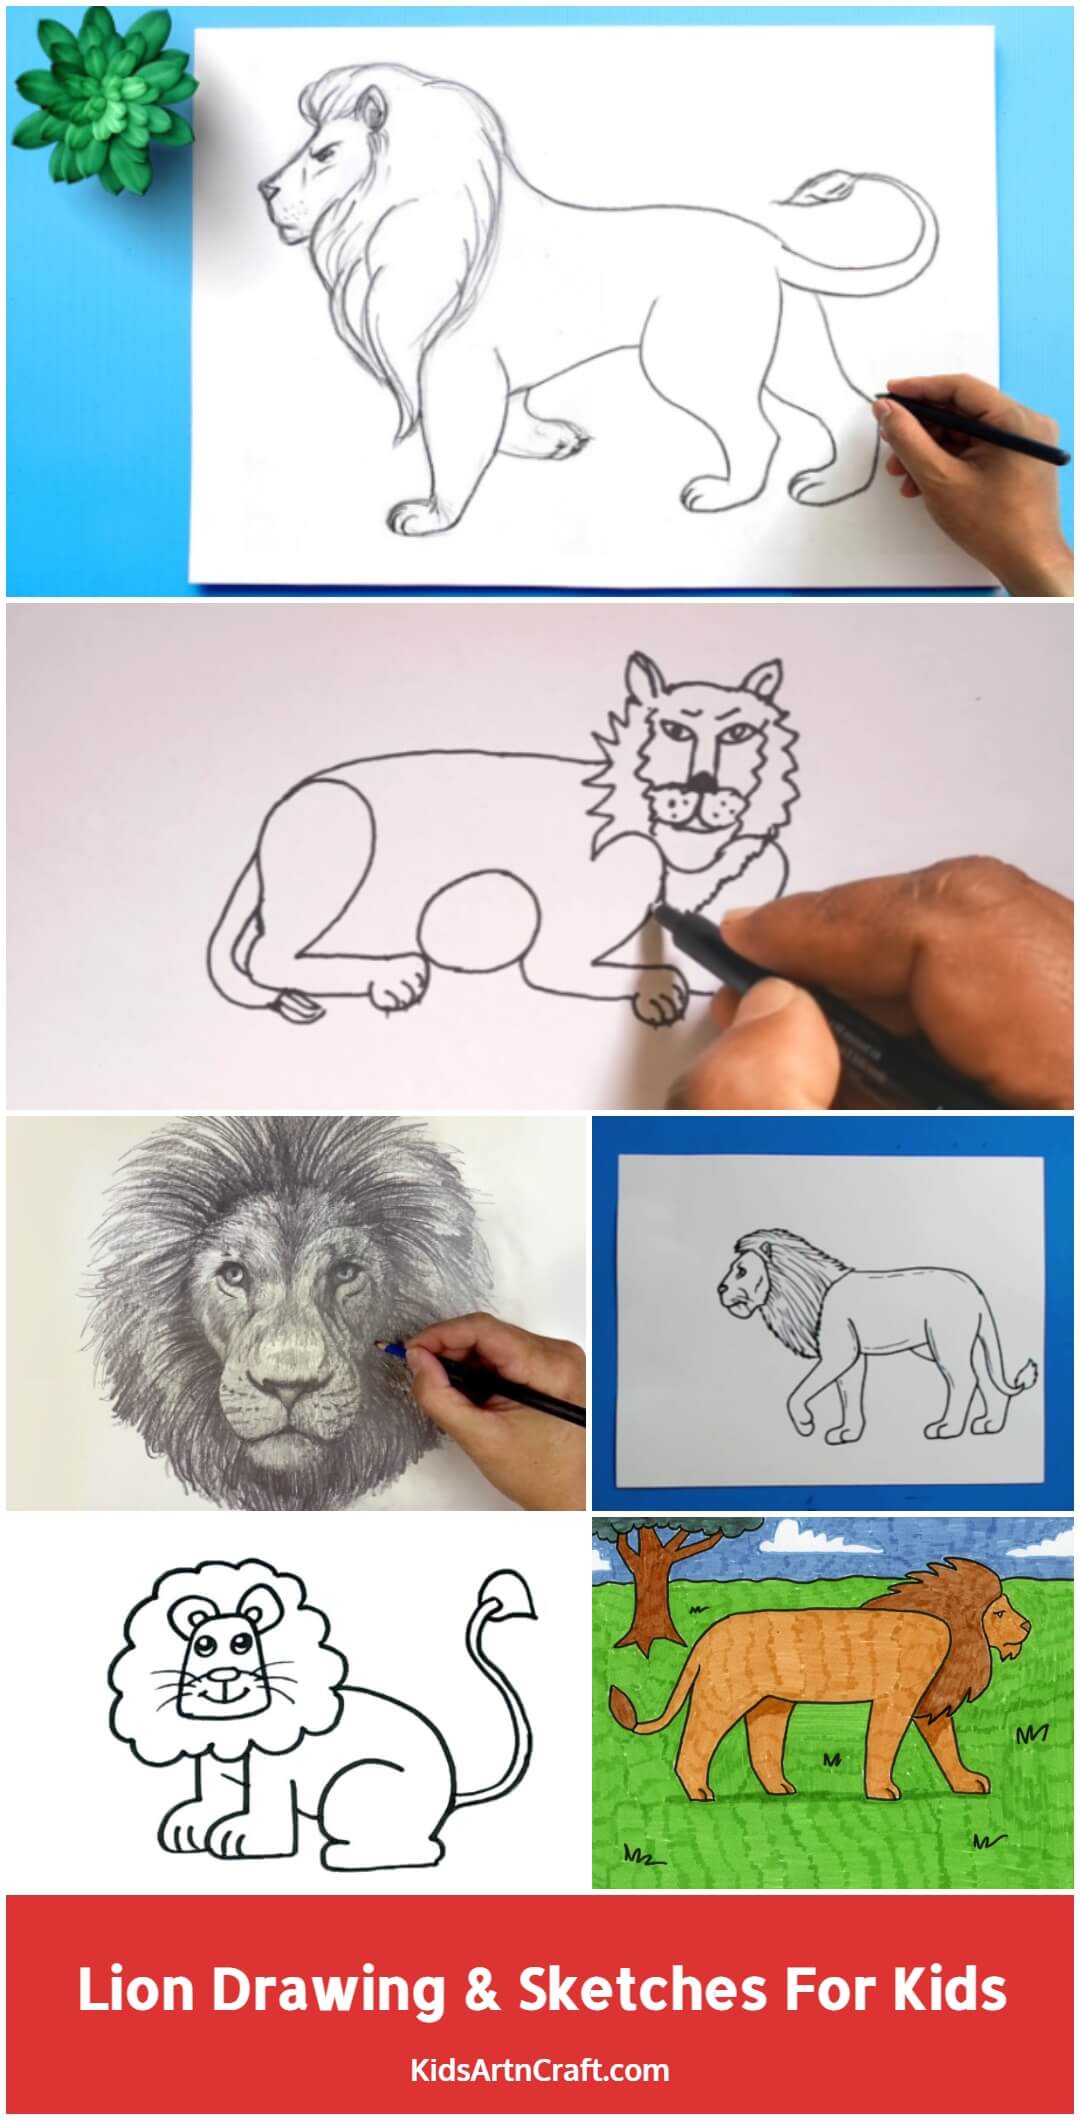 Lion Drawing & Sketches for Kids